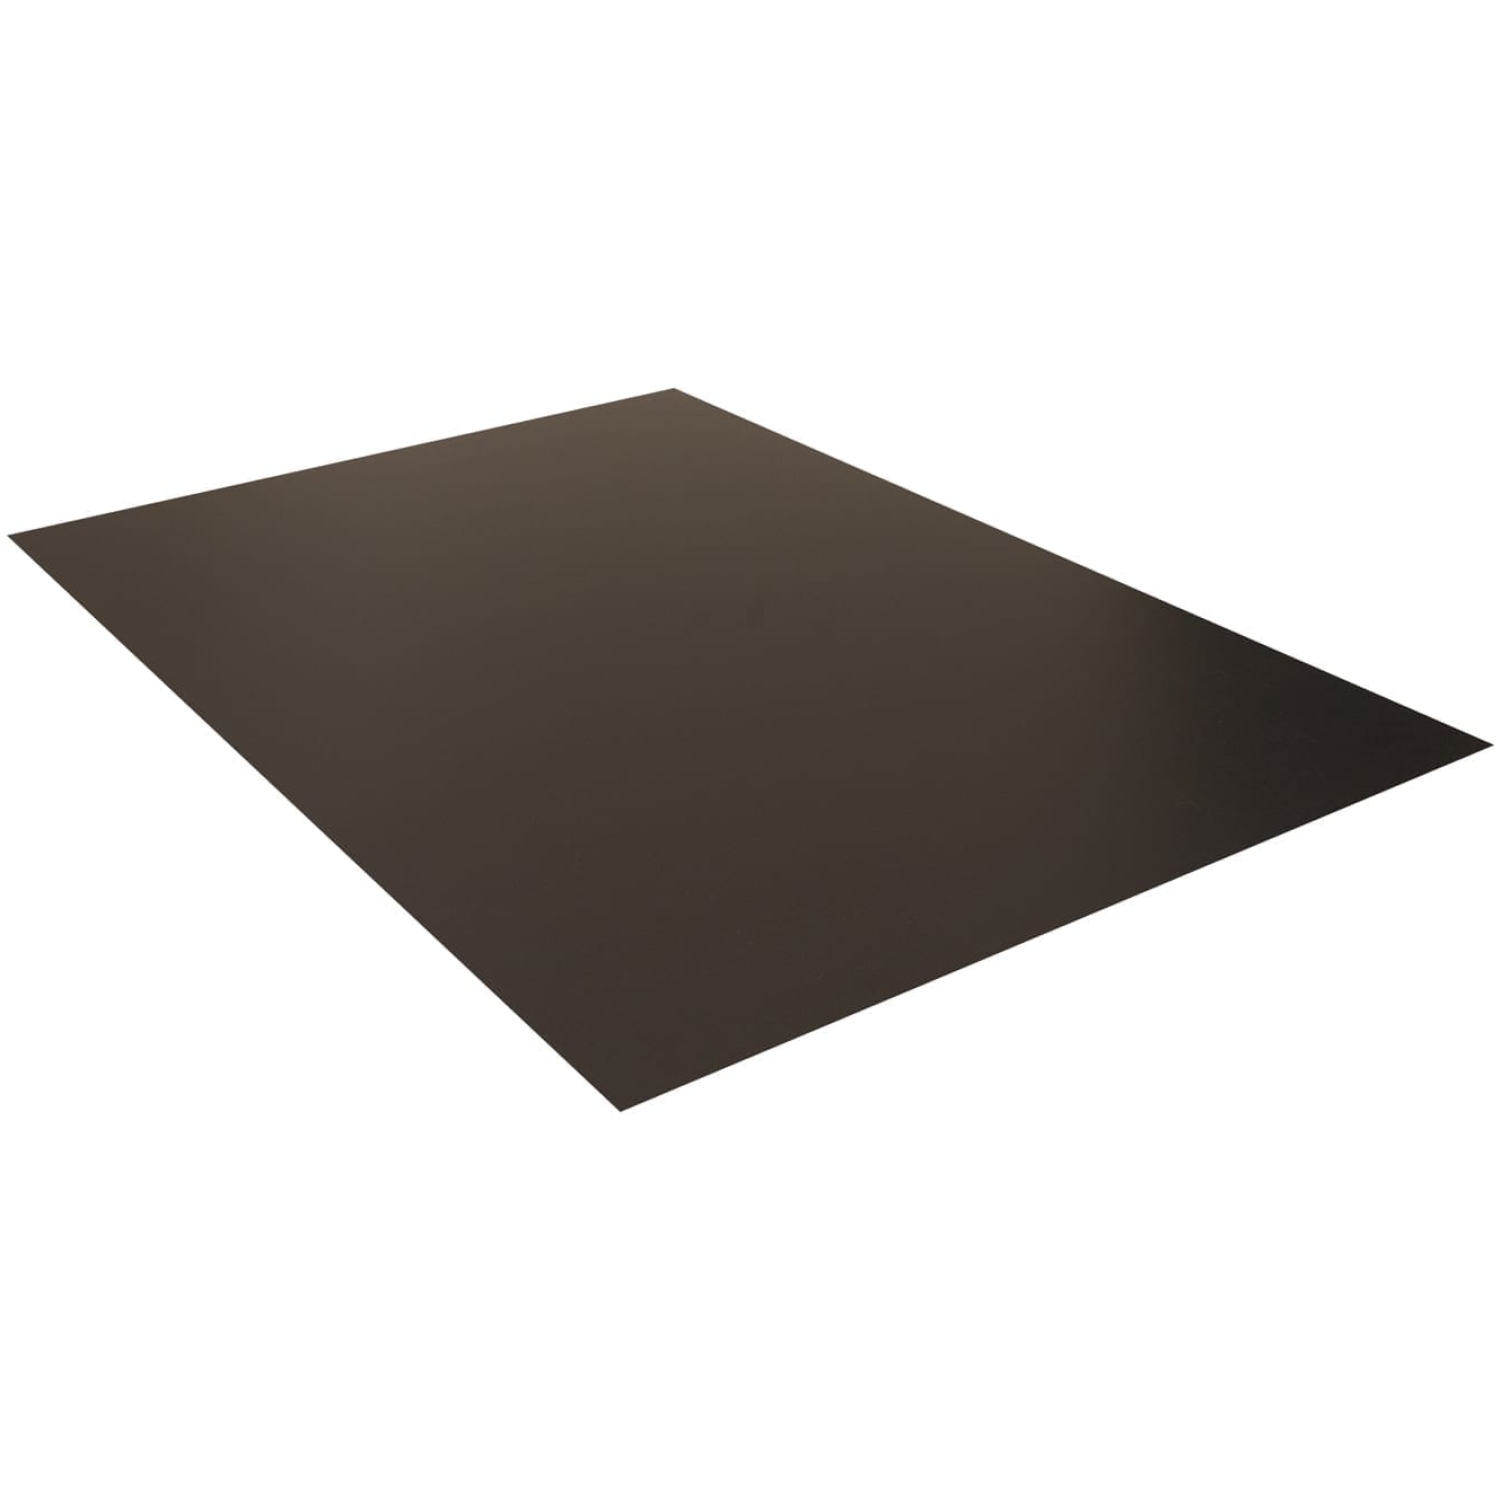 Signicade Deluxe A-frame Chalkboard Insert